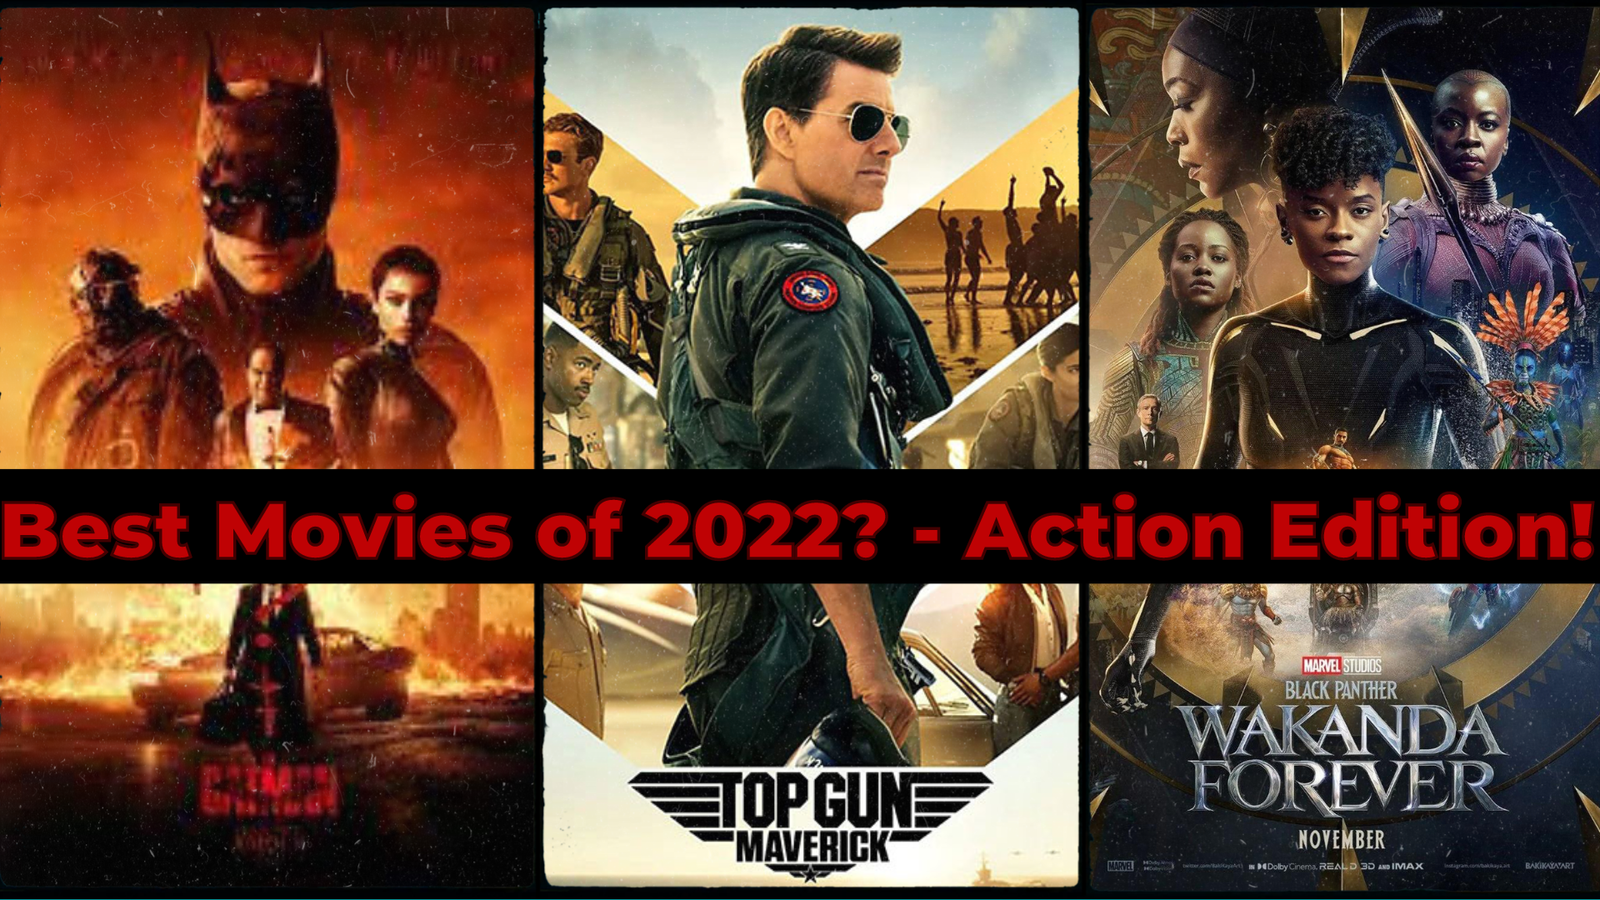 Best Movies of 2022? - Action Edition!